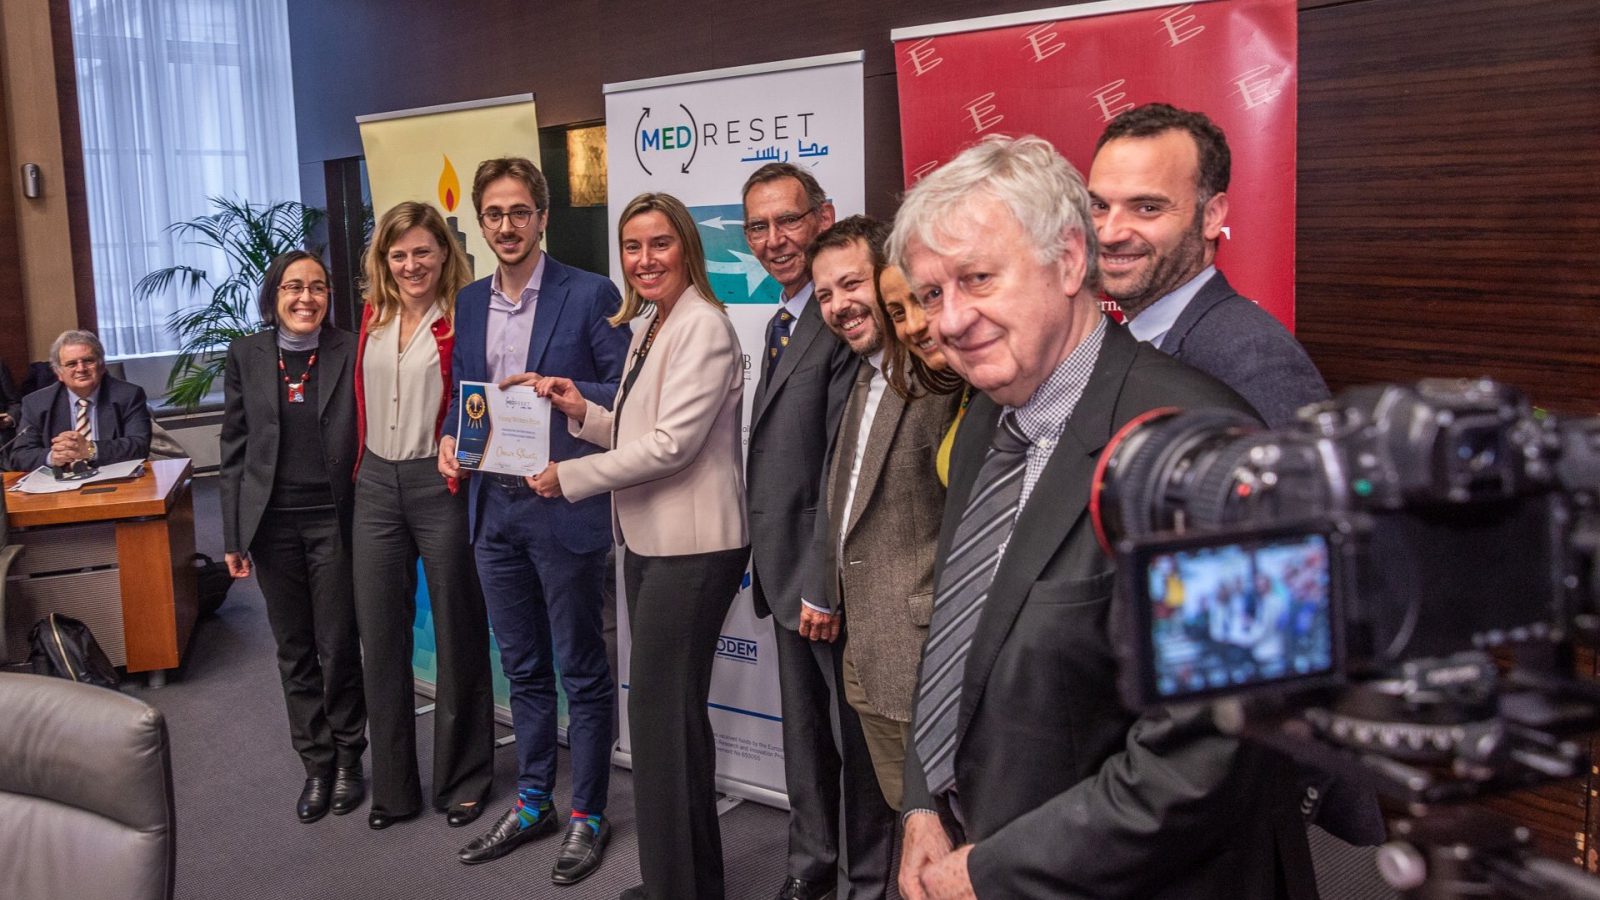 Omar Shanti, winner of the the EU-funded (MED)RESET Project’s “Young Writer Prize”